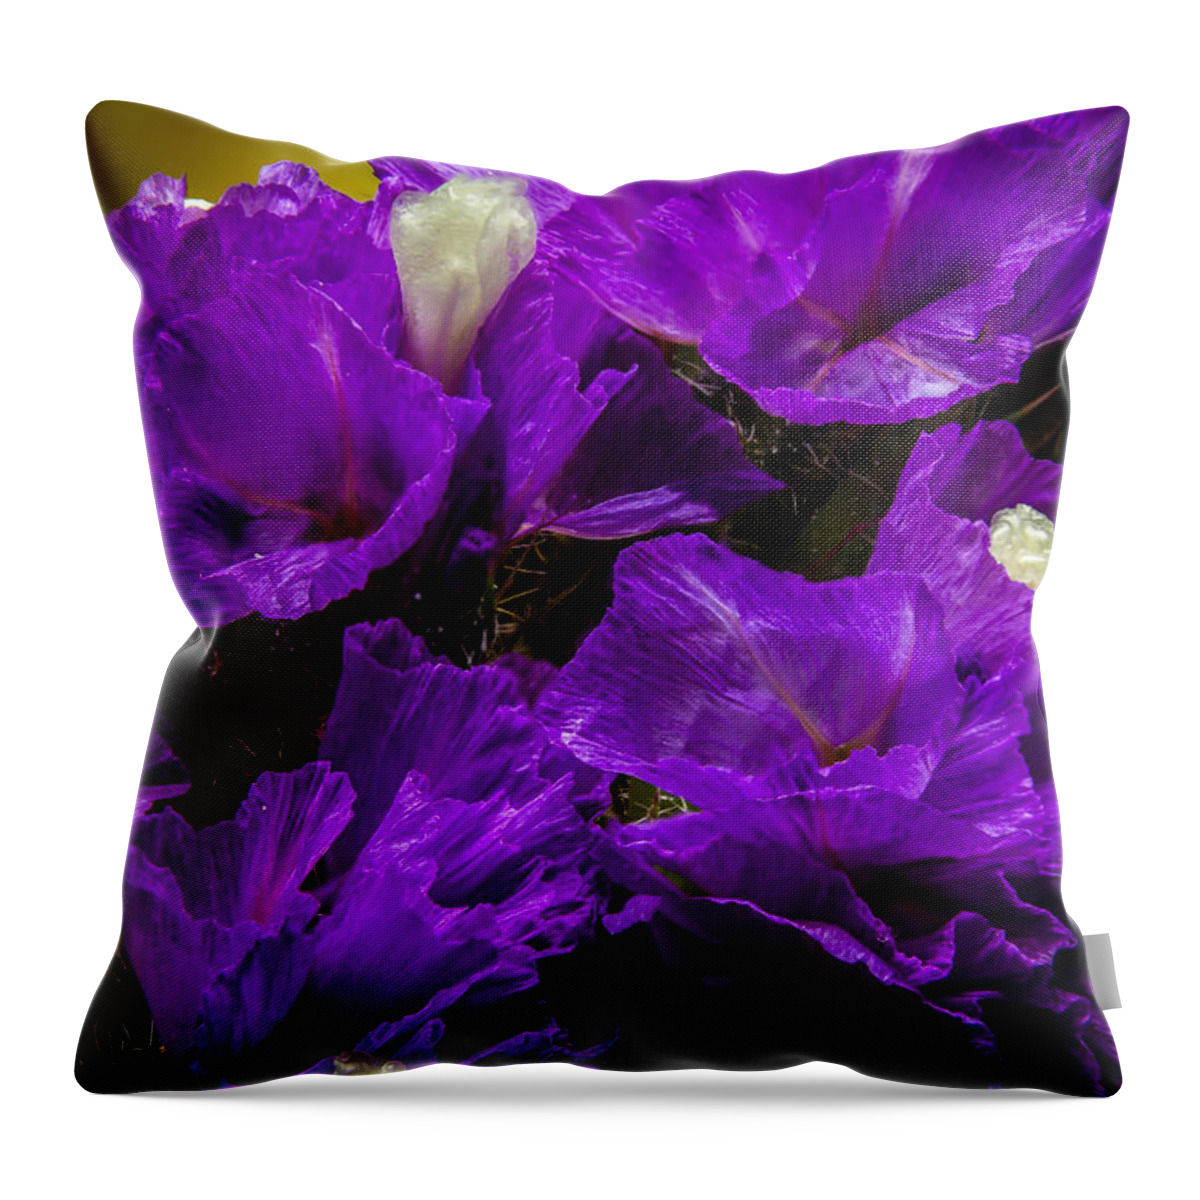 Flower Throw Pillow featuring the photograph Purple Statice by Ron Pate